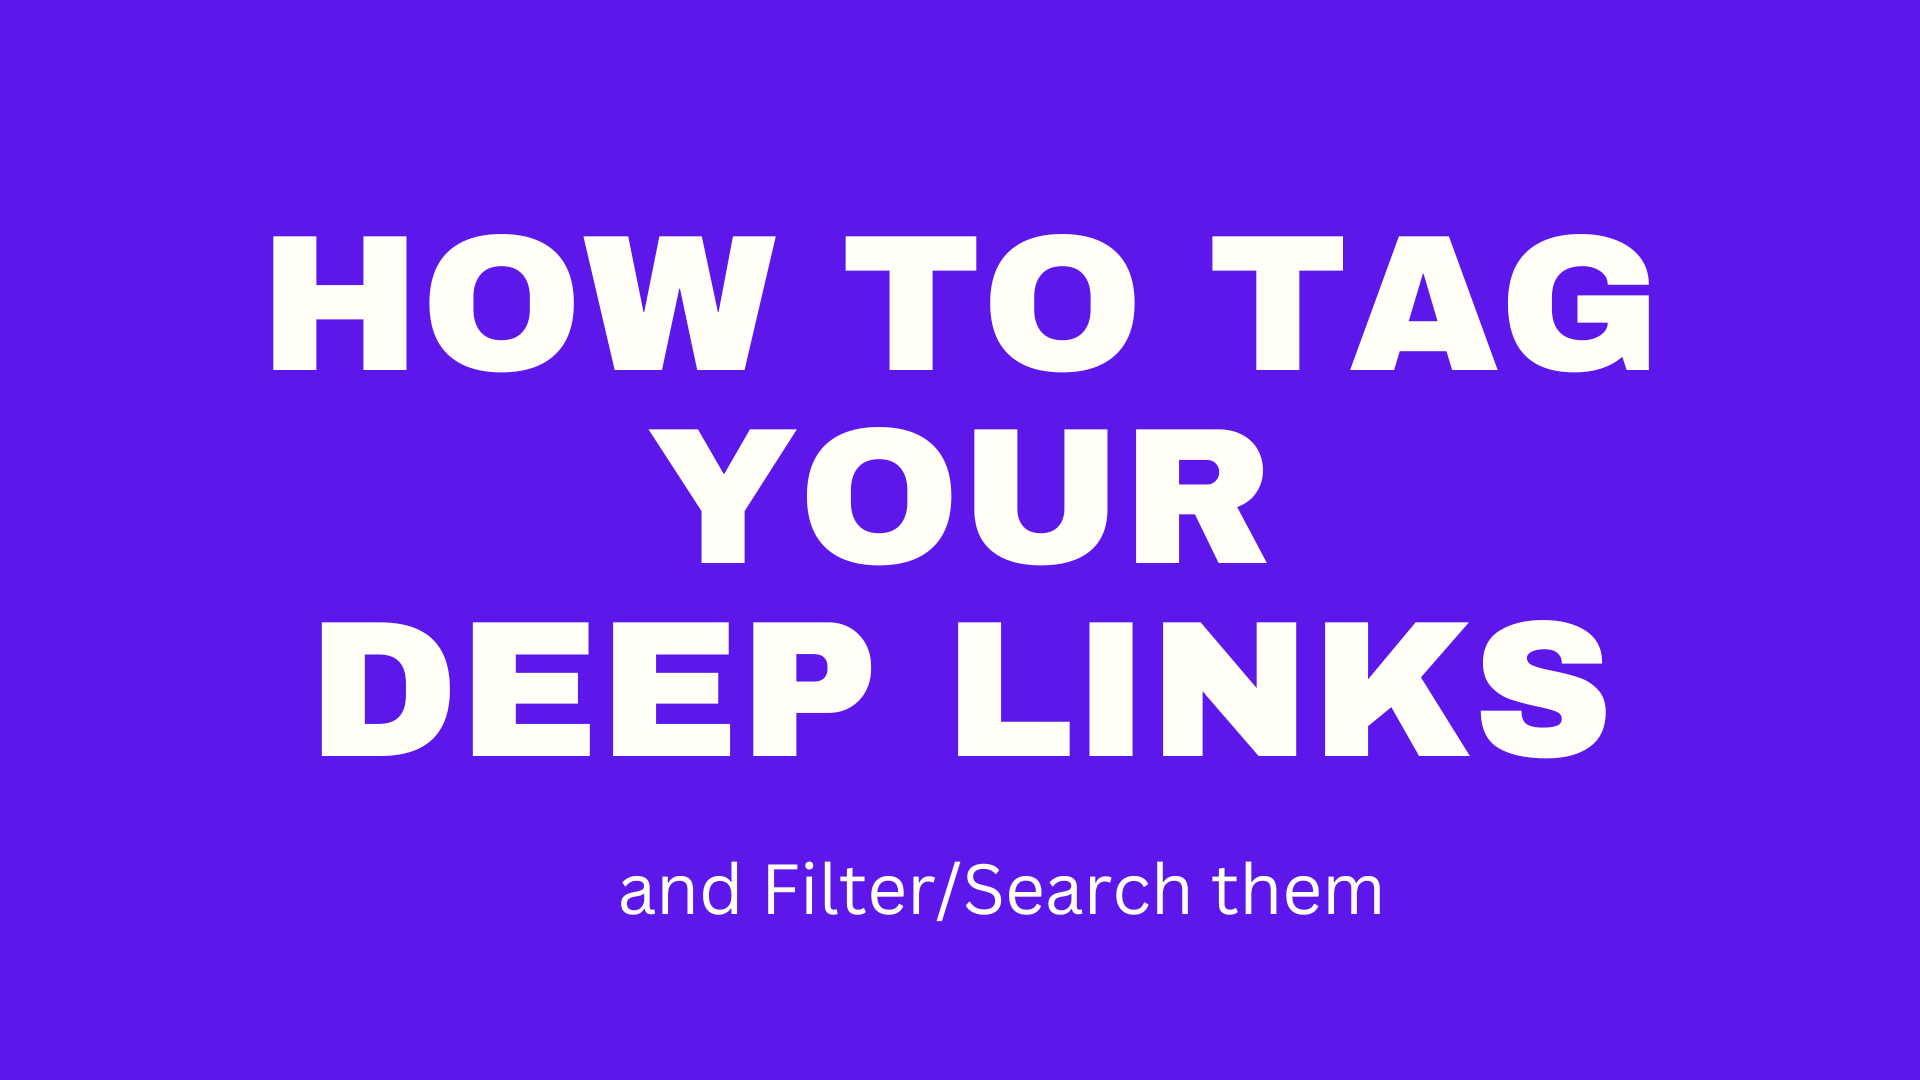 Introducing Tags - Organize your Deep Links Cover